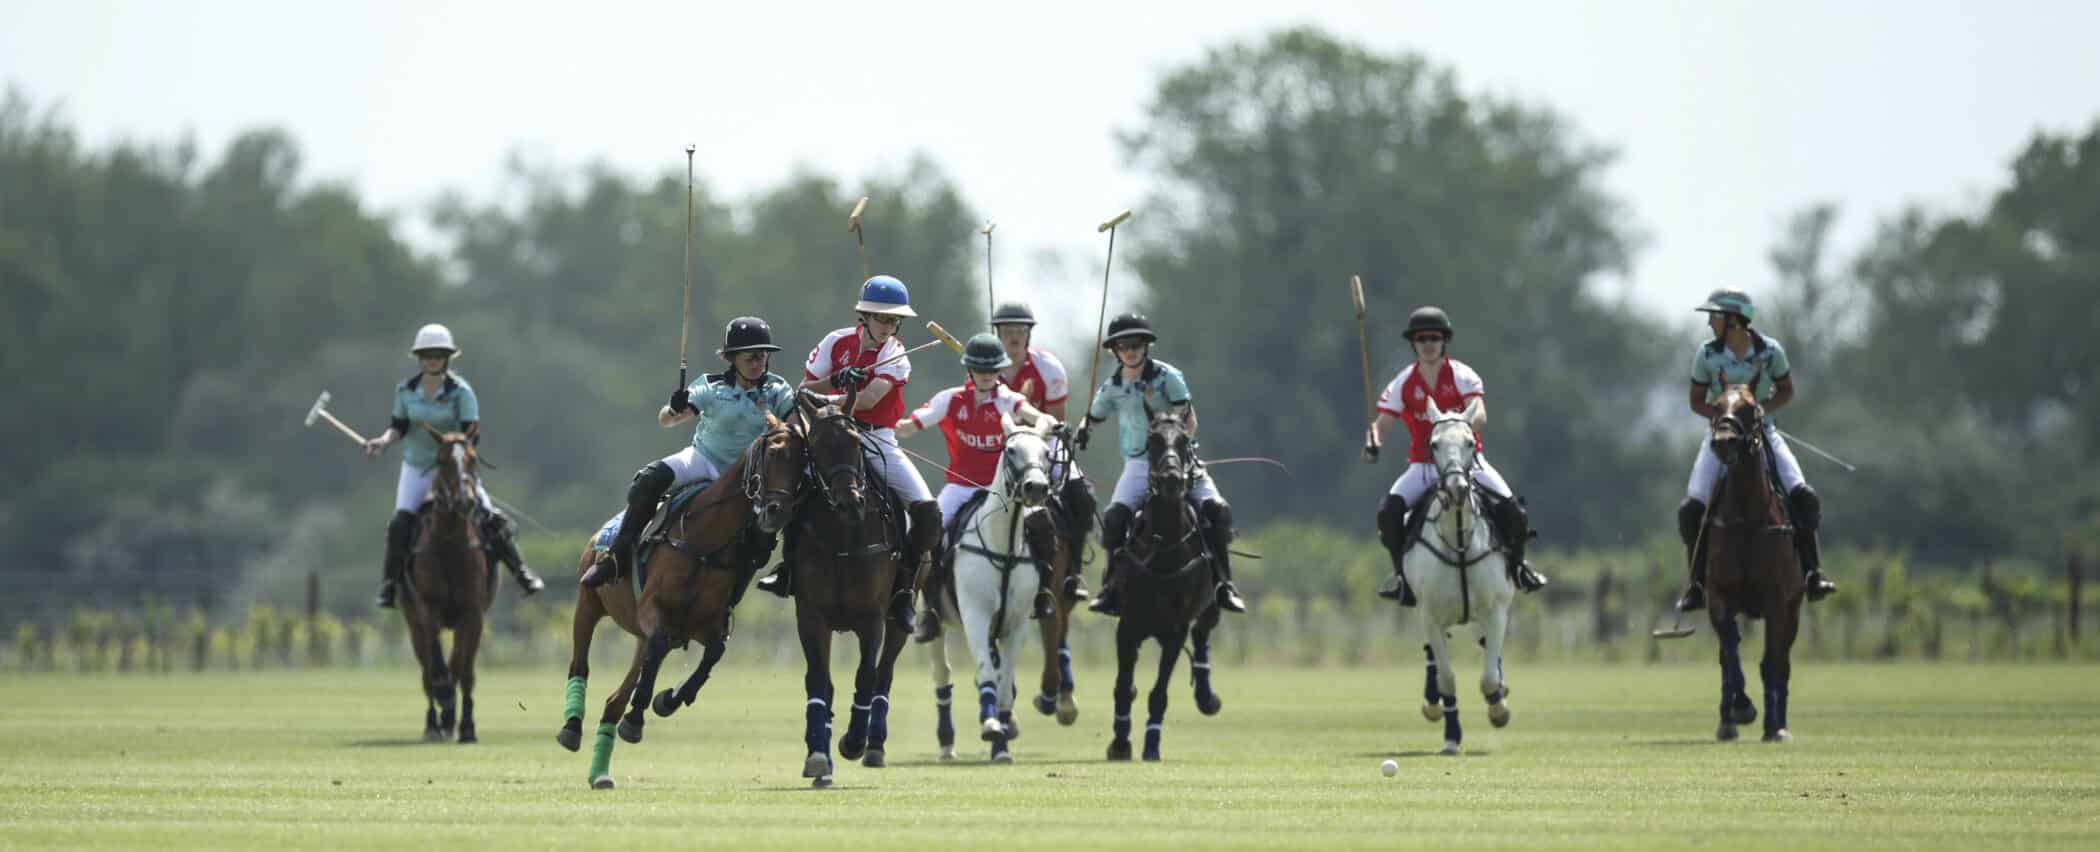 Polo at Radley College